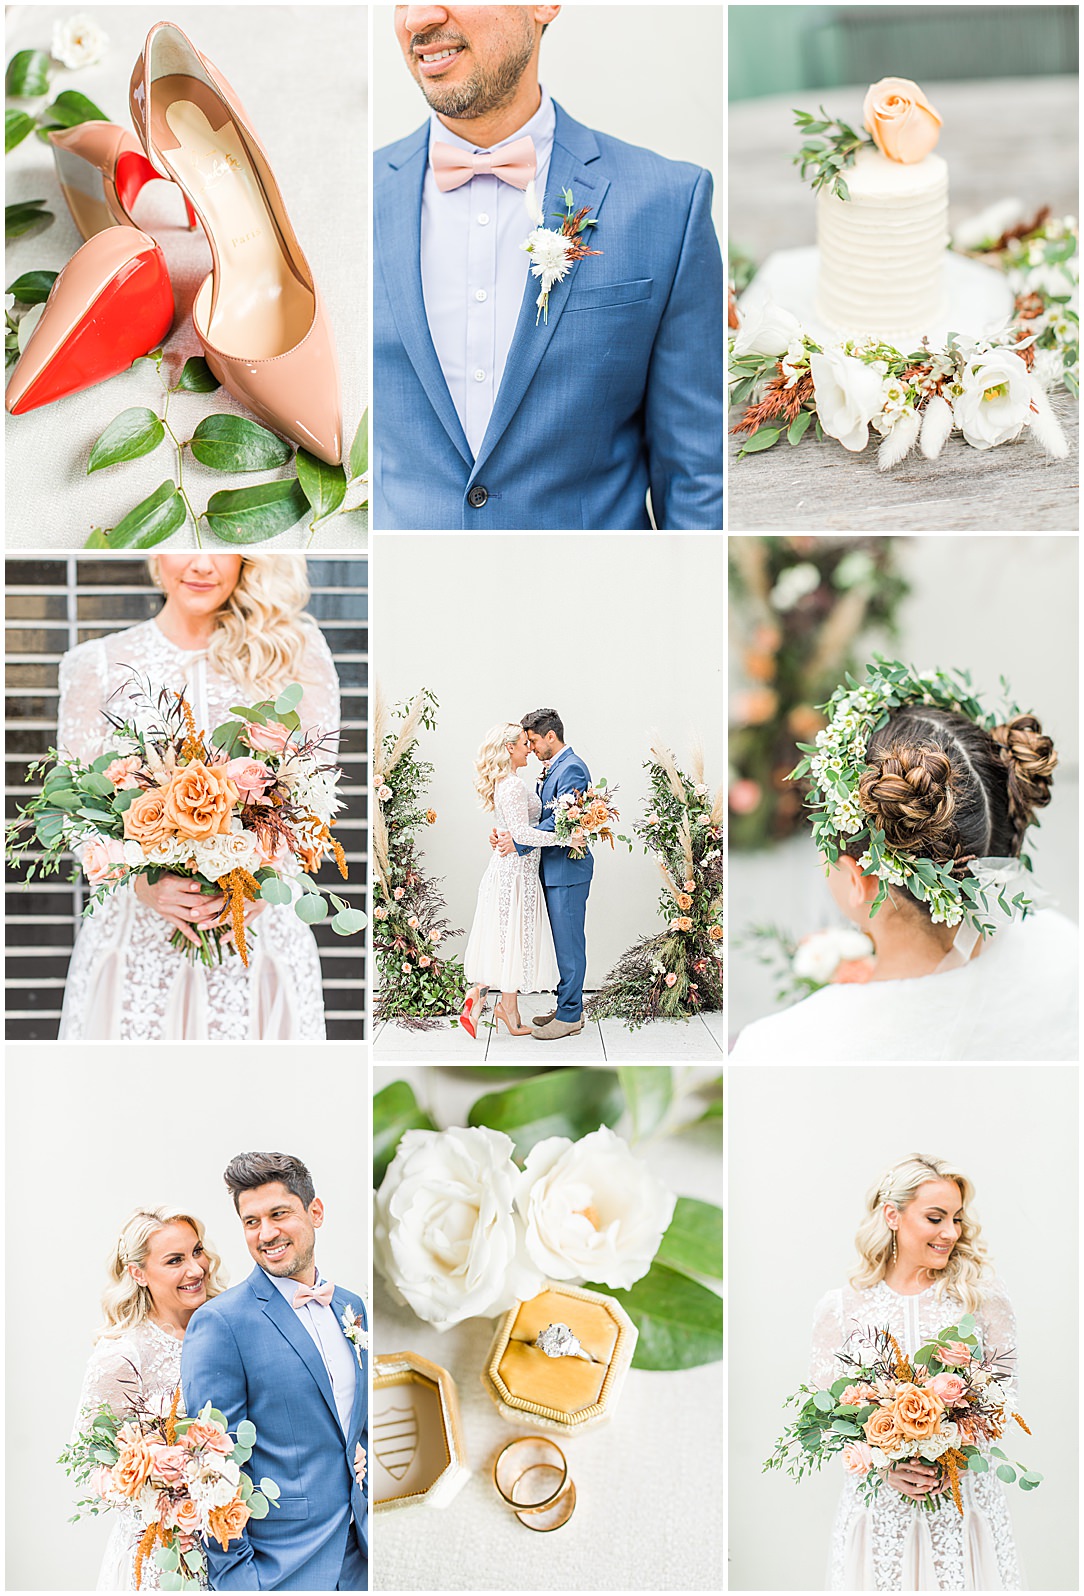 An intimate elopement wedding at South Congress Hotel in Downtown Austin by Allison Jeffers Wedding Photography 0070